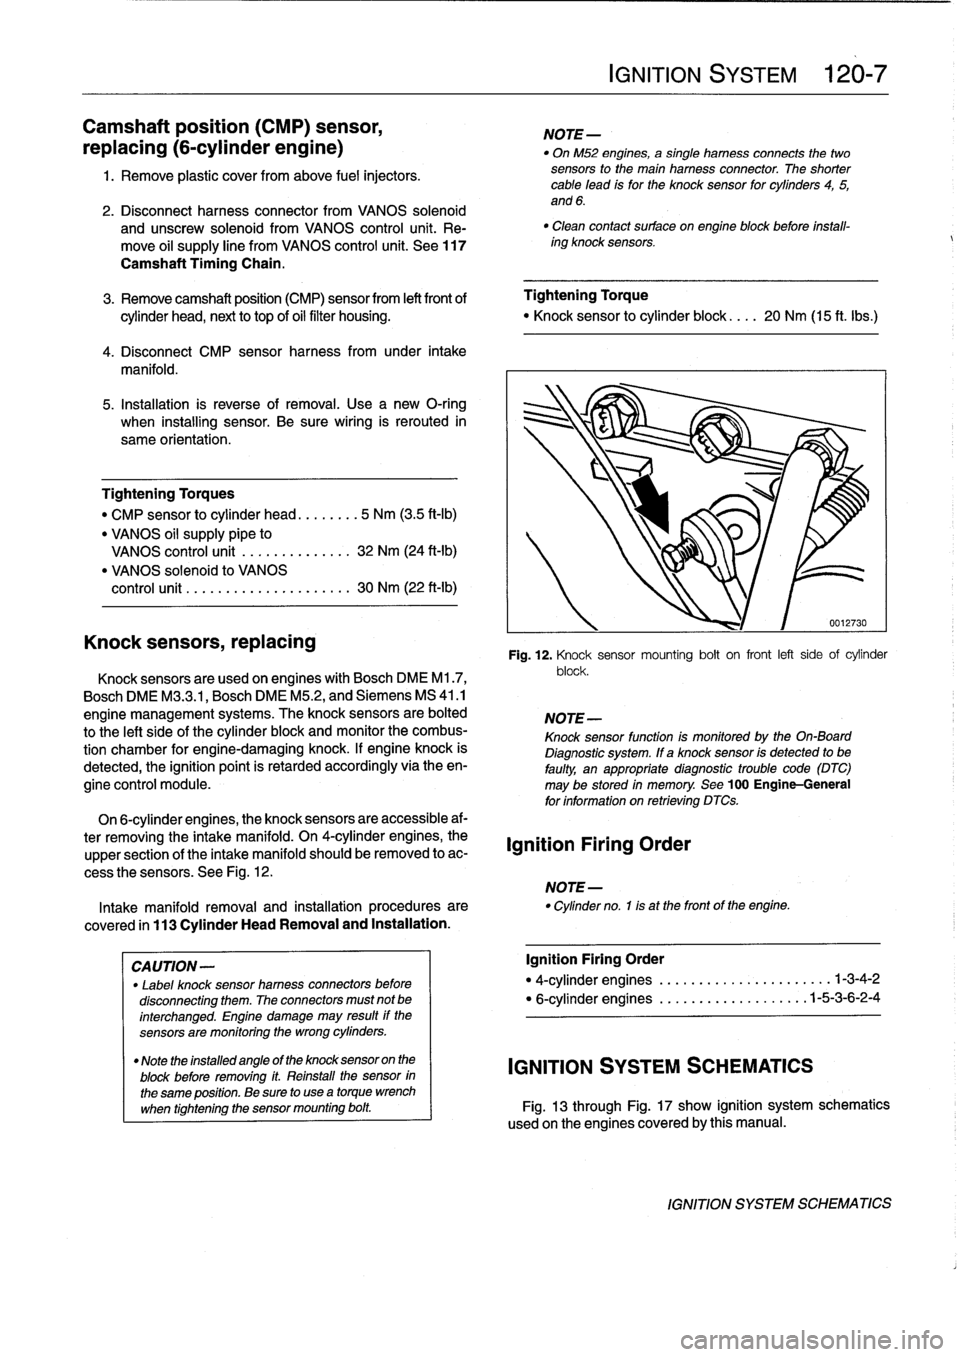 BMW 318i 1997 E36 Owners Manual 
Camshaft
position
(CMP)
sensor,

replacing
(6-cylinder
engine)

1
.
Remove
plastic
cover
from
above
fuel
injectors
.

2
.
Disconnect
harness
connector
from
VANOS
solenoid

and
unscrew
solenoid
from
V